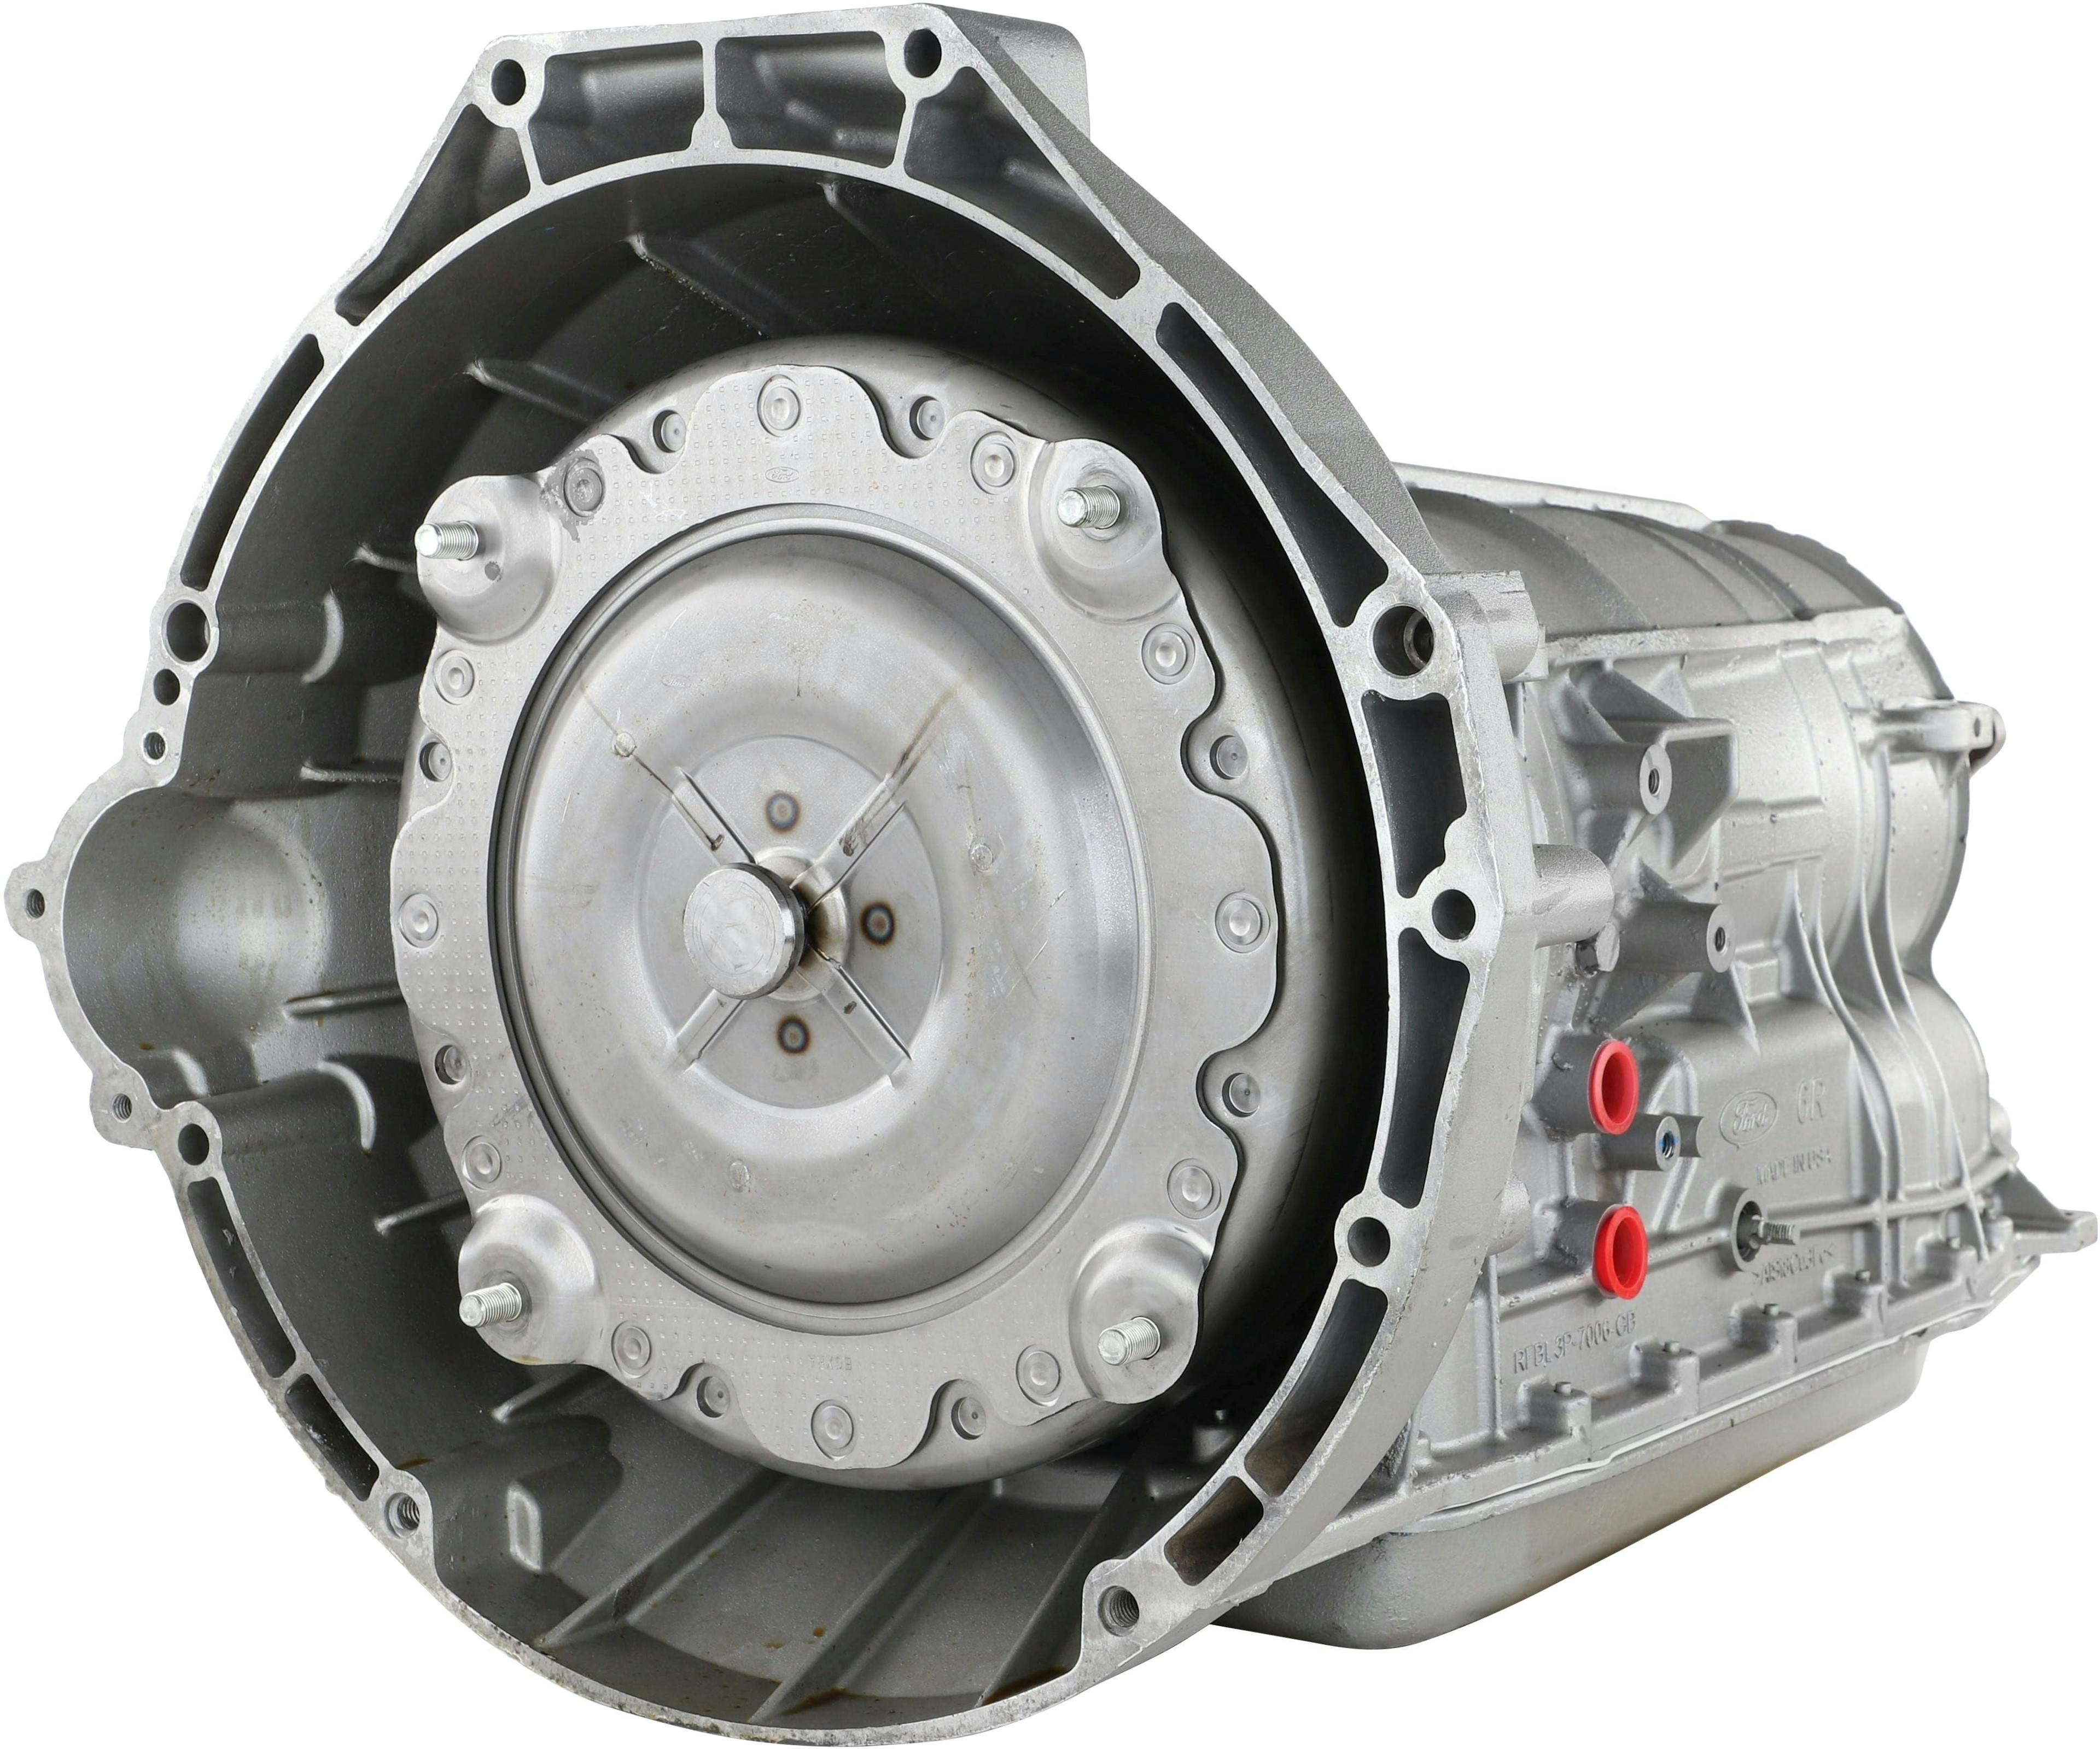 Automatic Transmission for 2012-2014 Ford Expedition/Lincoln Navigator RWD with 5.4L V8 Engine